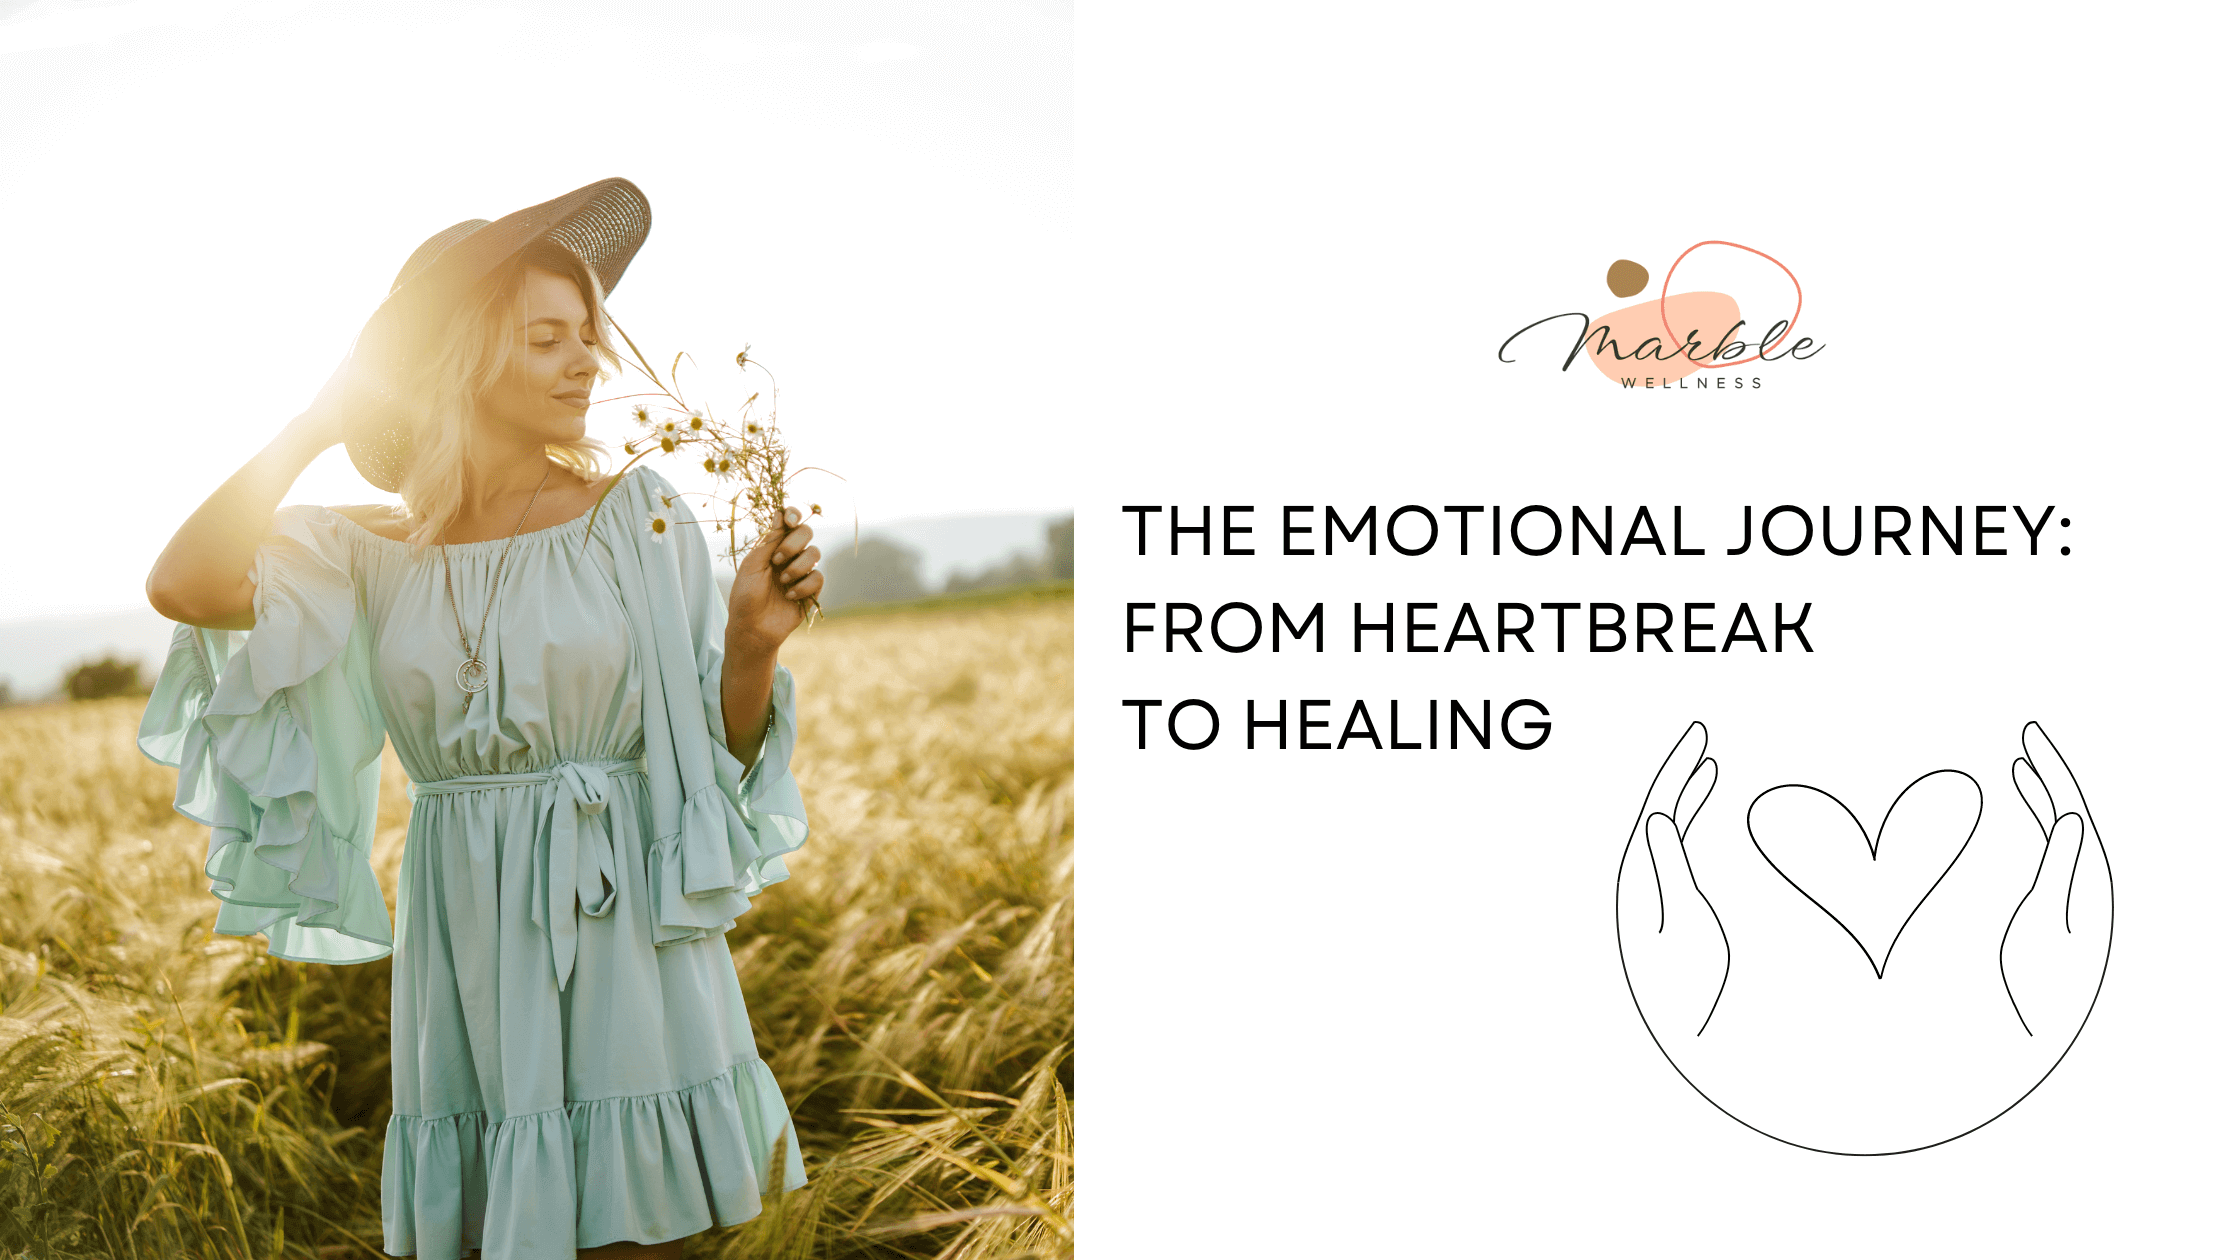 Cover photo for blog: "The Emotional Journey After a Breakup in Chicago: From Heartbreak to Healing" A Chicago therapist can help you feel more grounded, understood, and able to move forward after a breakup.